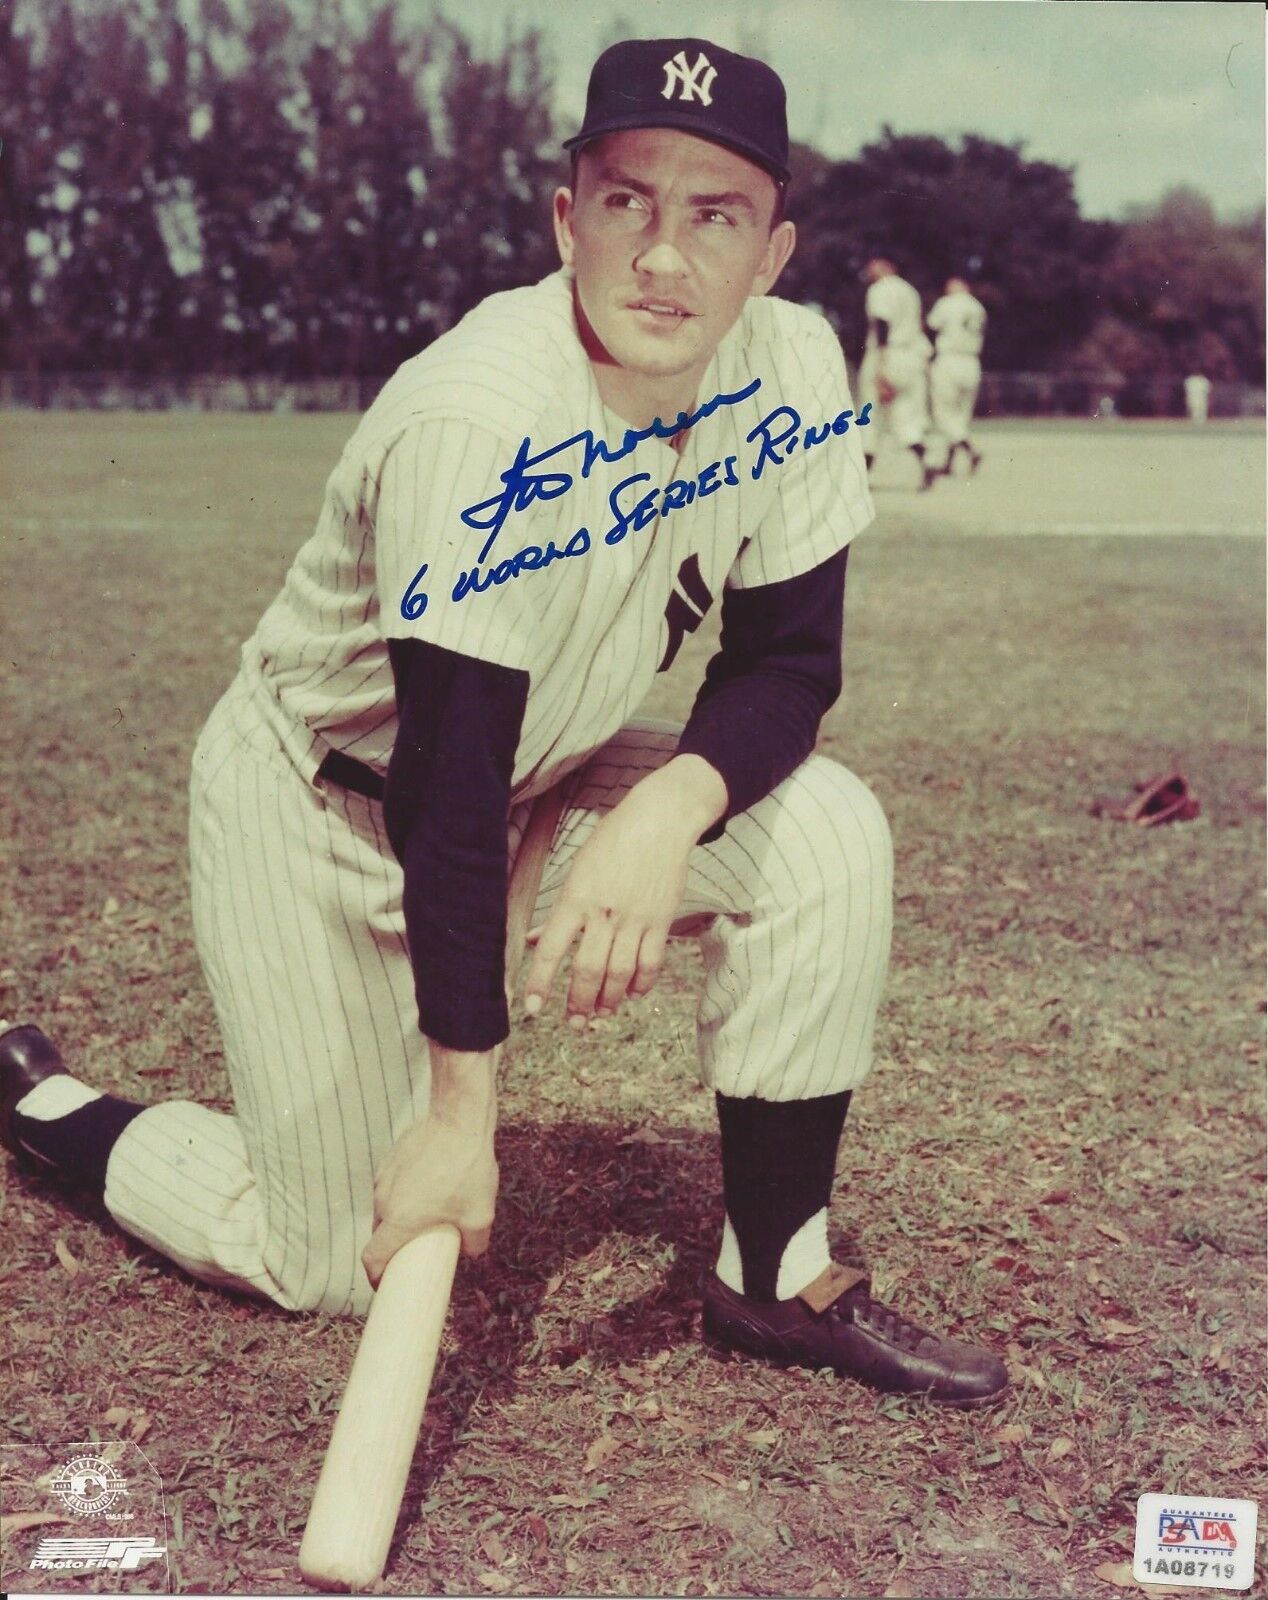 Irv Noren New York Yankees Signed 8x10 Photo Poster painting PSA/DNA #1A08719